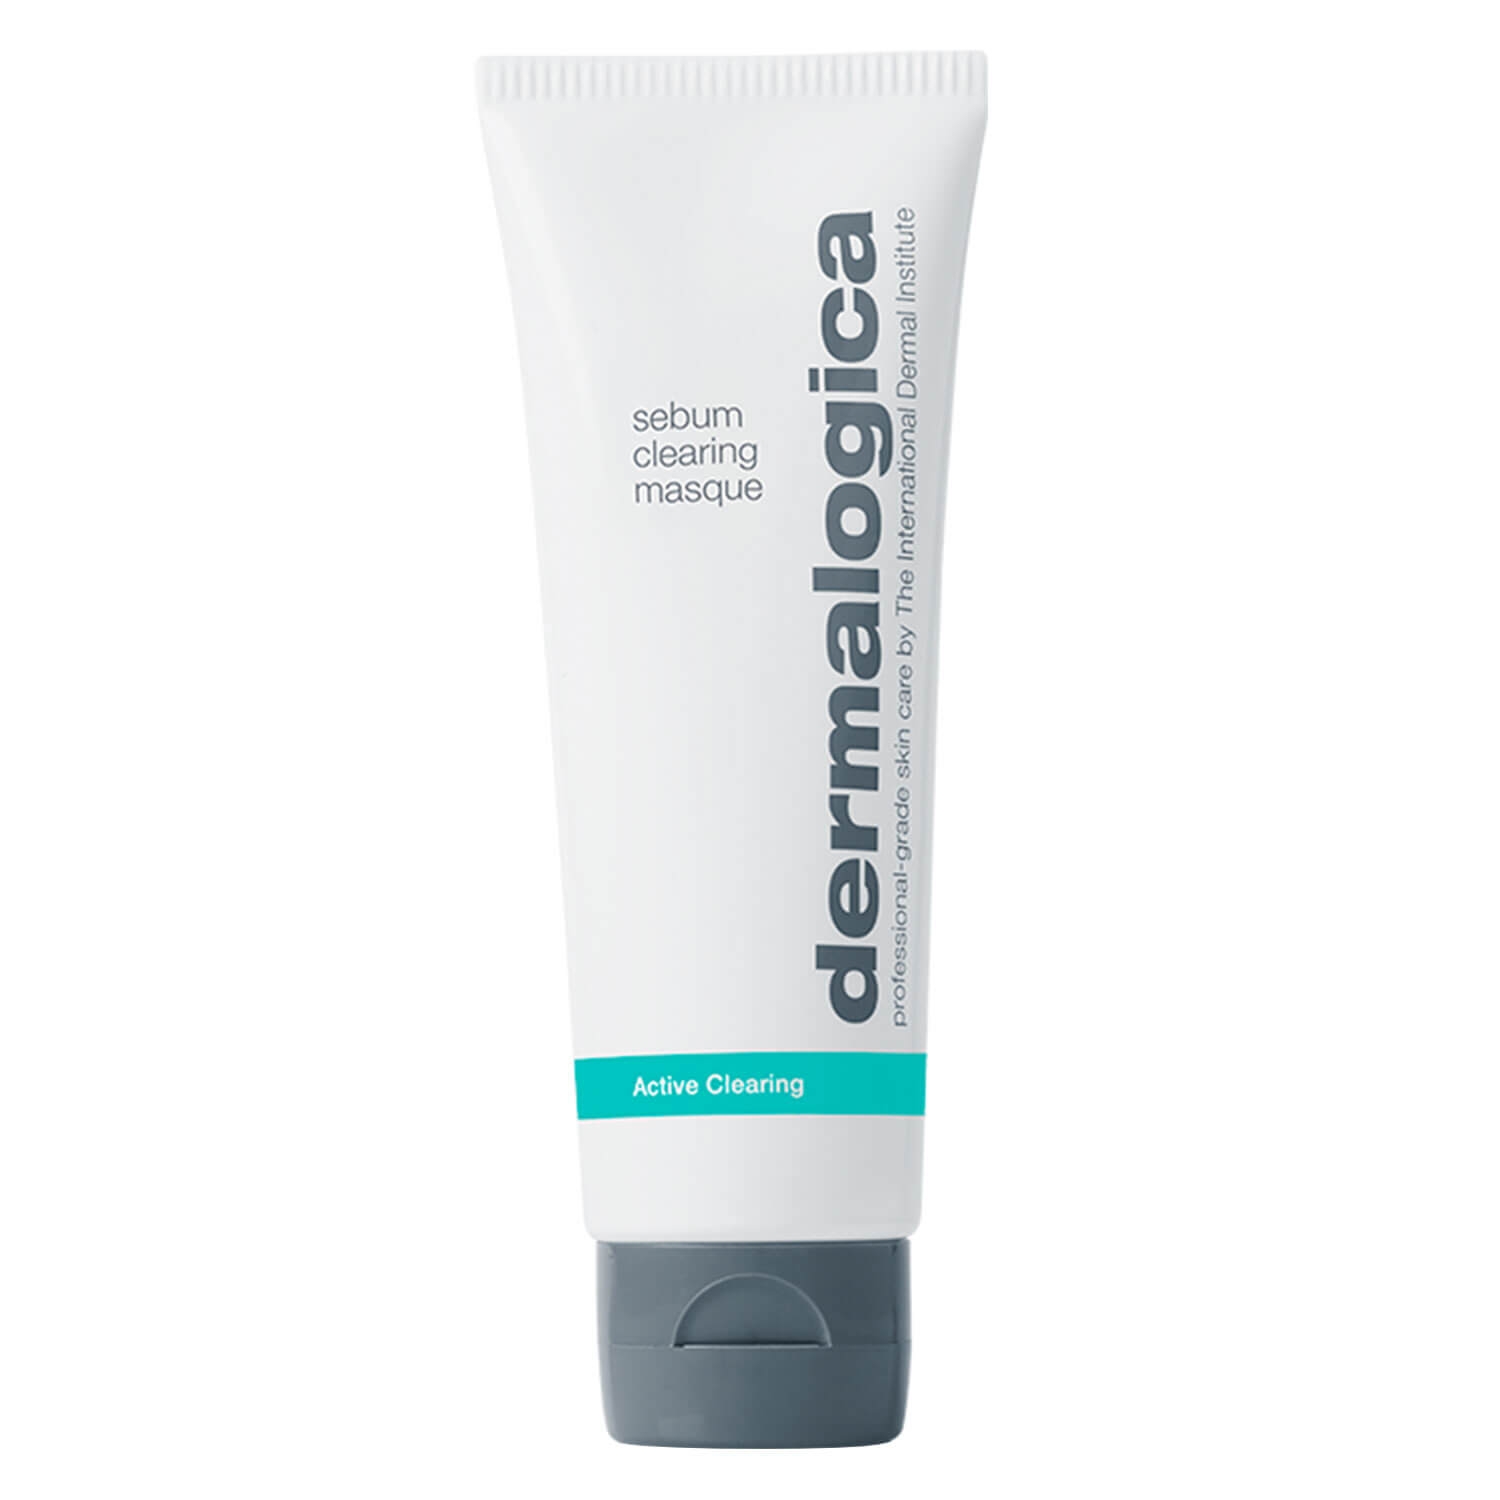 Product image from Active Clearing - Sebum Clearing Masque